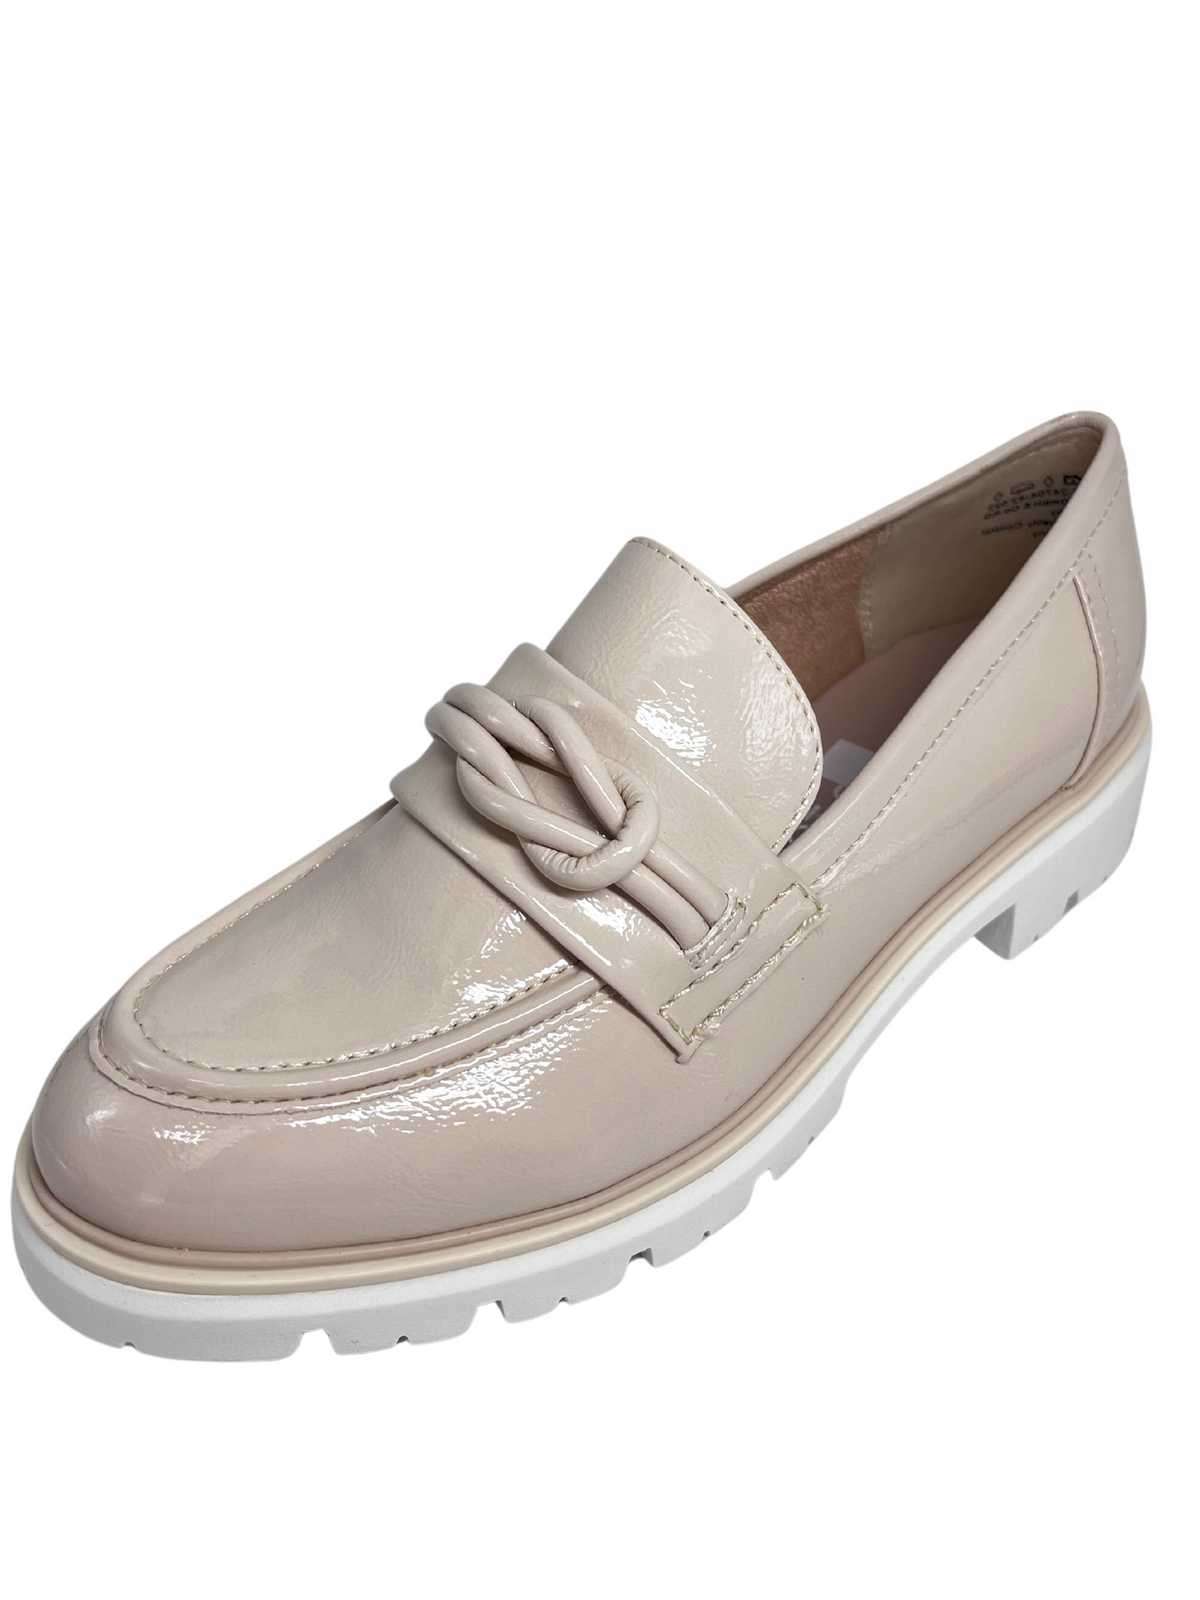 Marco Tozzi Cream Patent Loafer With Knot Design